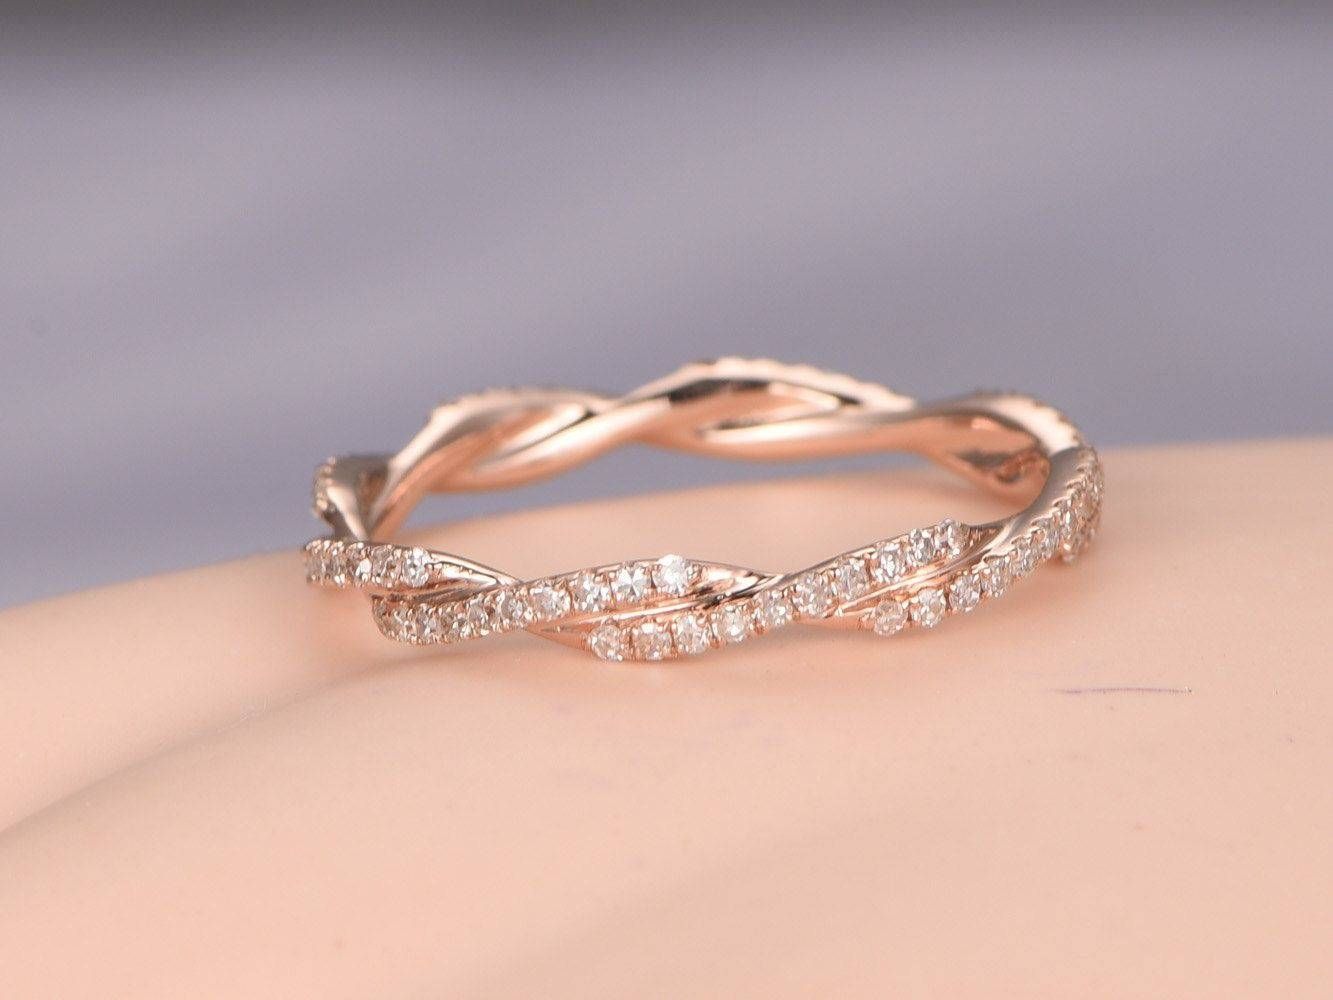 Unique 10 Year Wedding Anniversary Rings Collection – Alsayegh Inside Most Recent 10 Year Anniversary Rings Ideas (View 14 of 15)